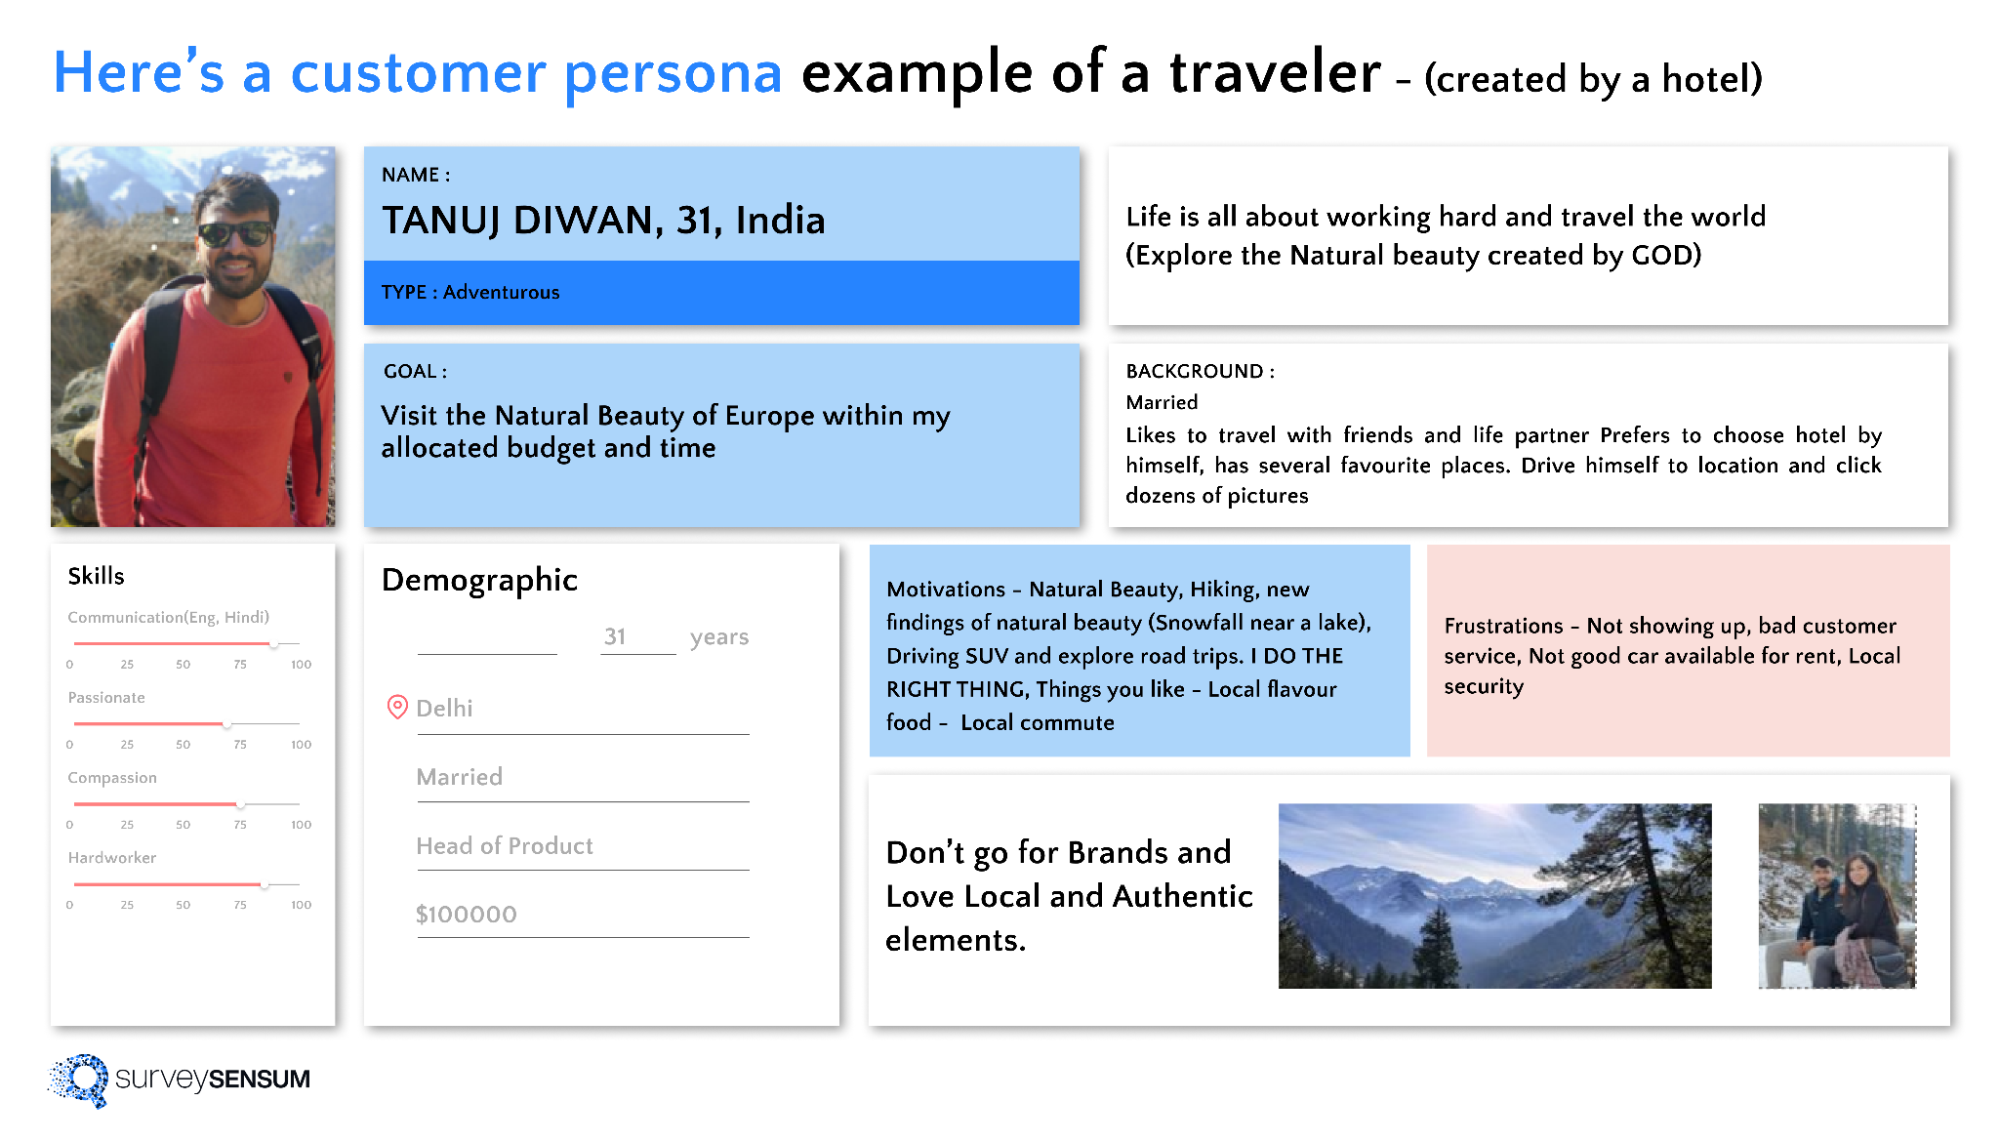 An image that shows a Customer Persona Example of a traveler where the customer’s background, demographics, skills, and goals are mapped.